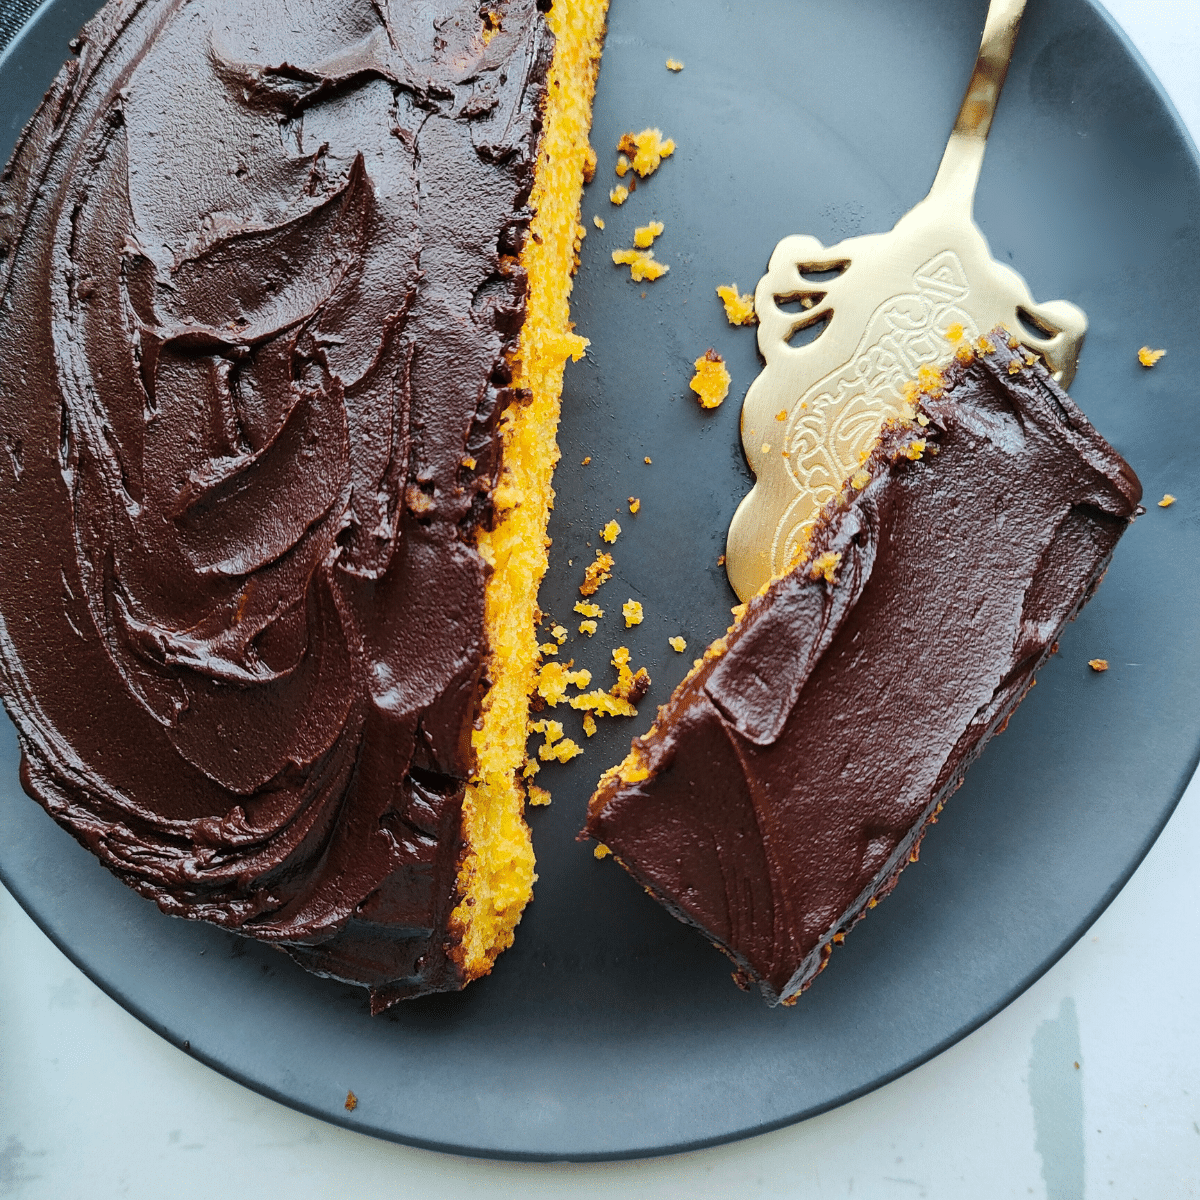 The cake is wonderfully fluffy and delicate, plus the carrots give it a stunning orange color. 